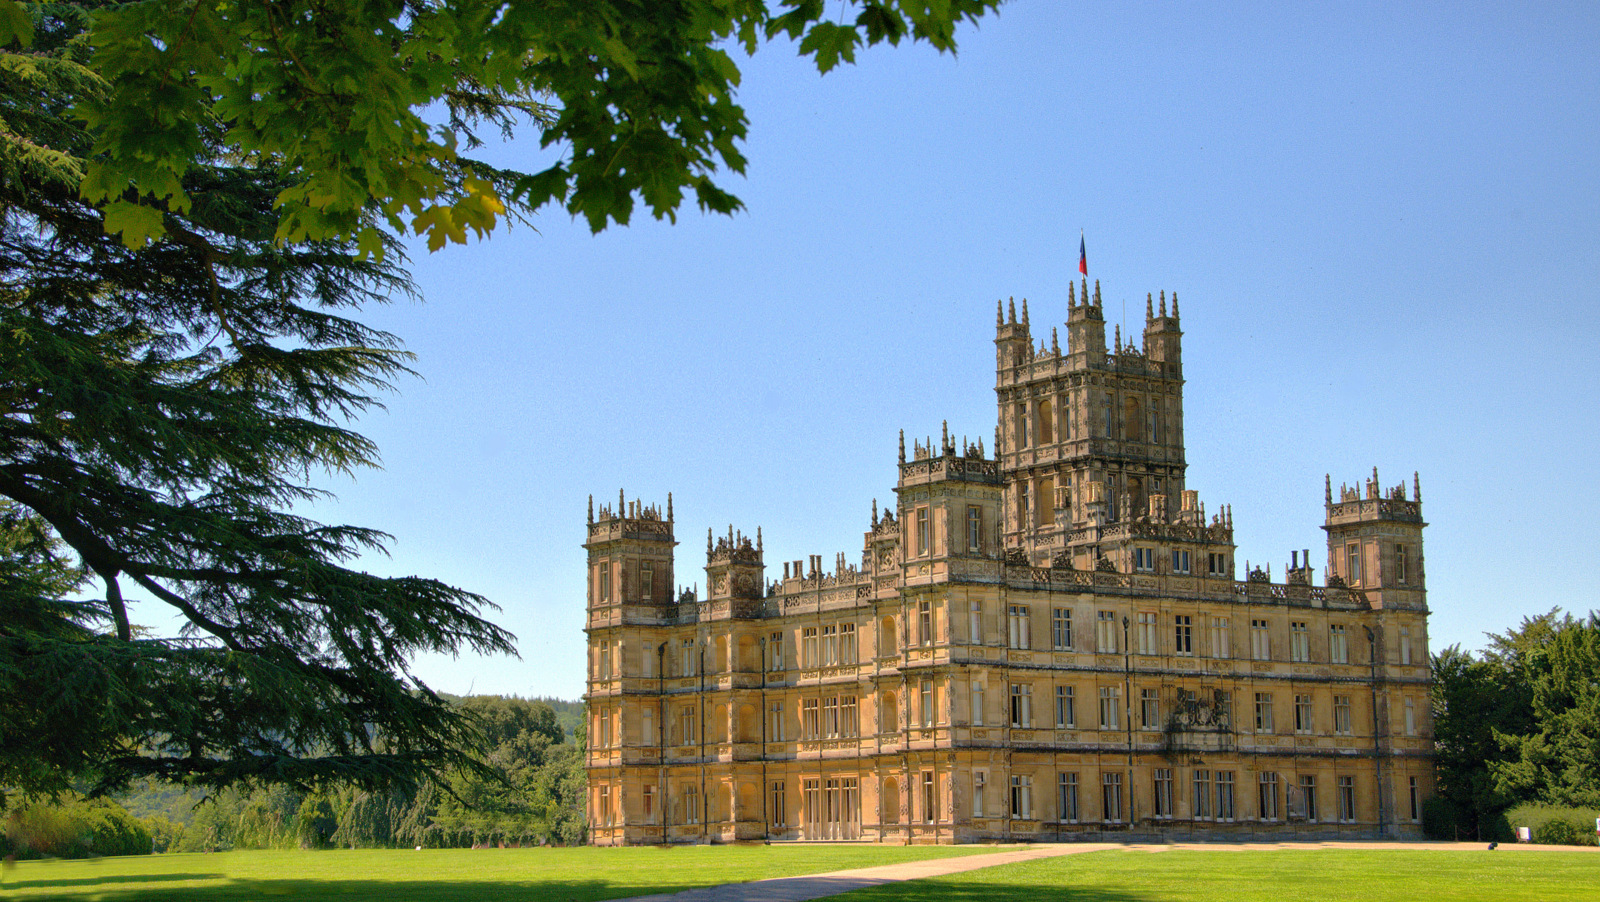 Highclere Castle - Downton Abbey - Wed 10th April 2019